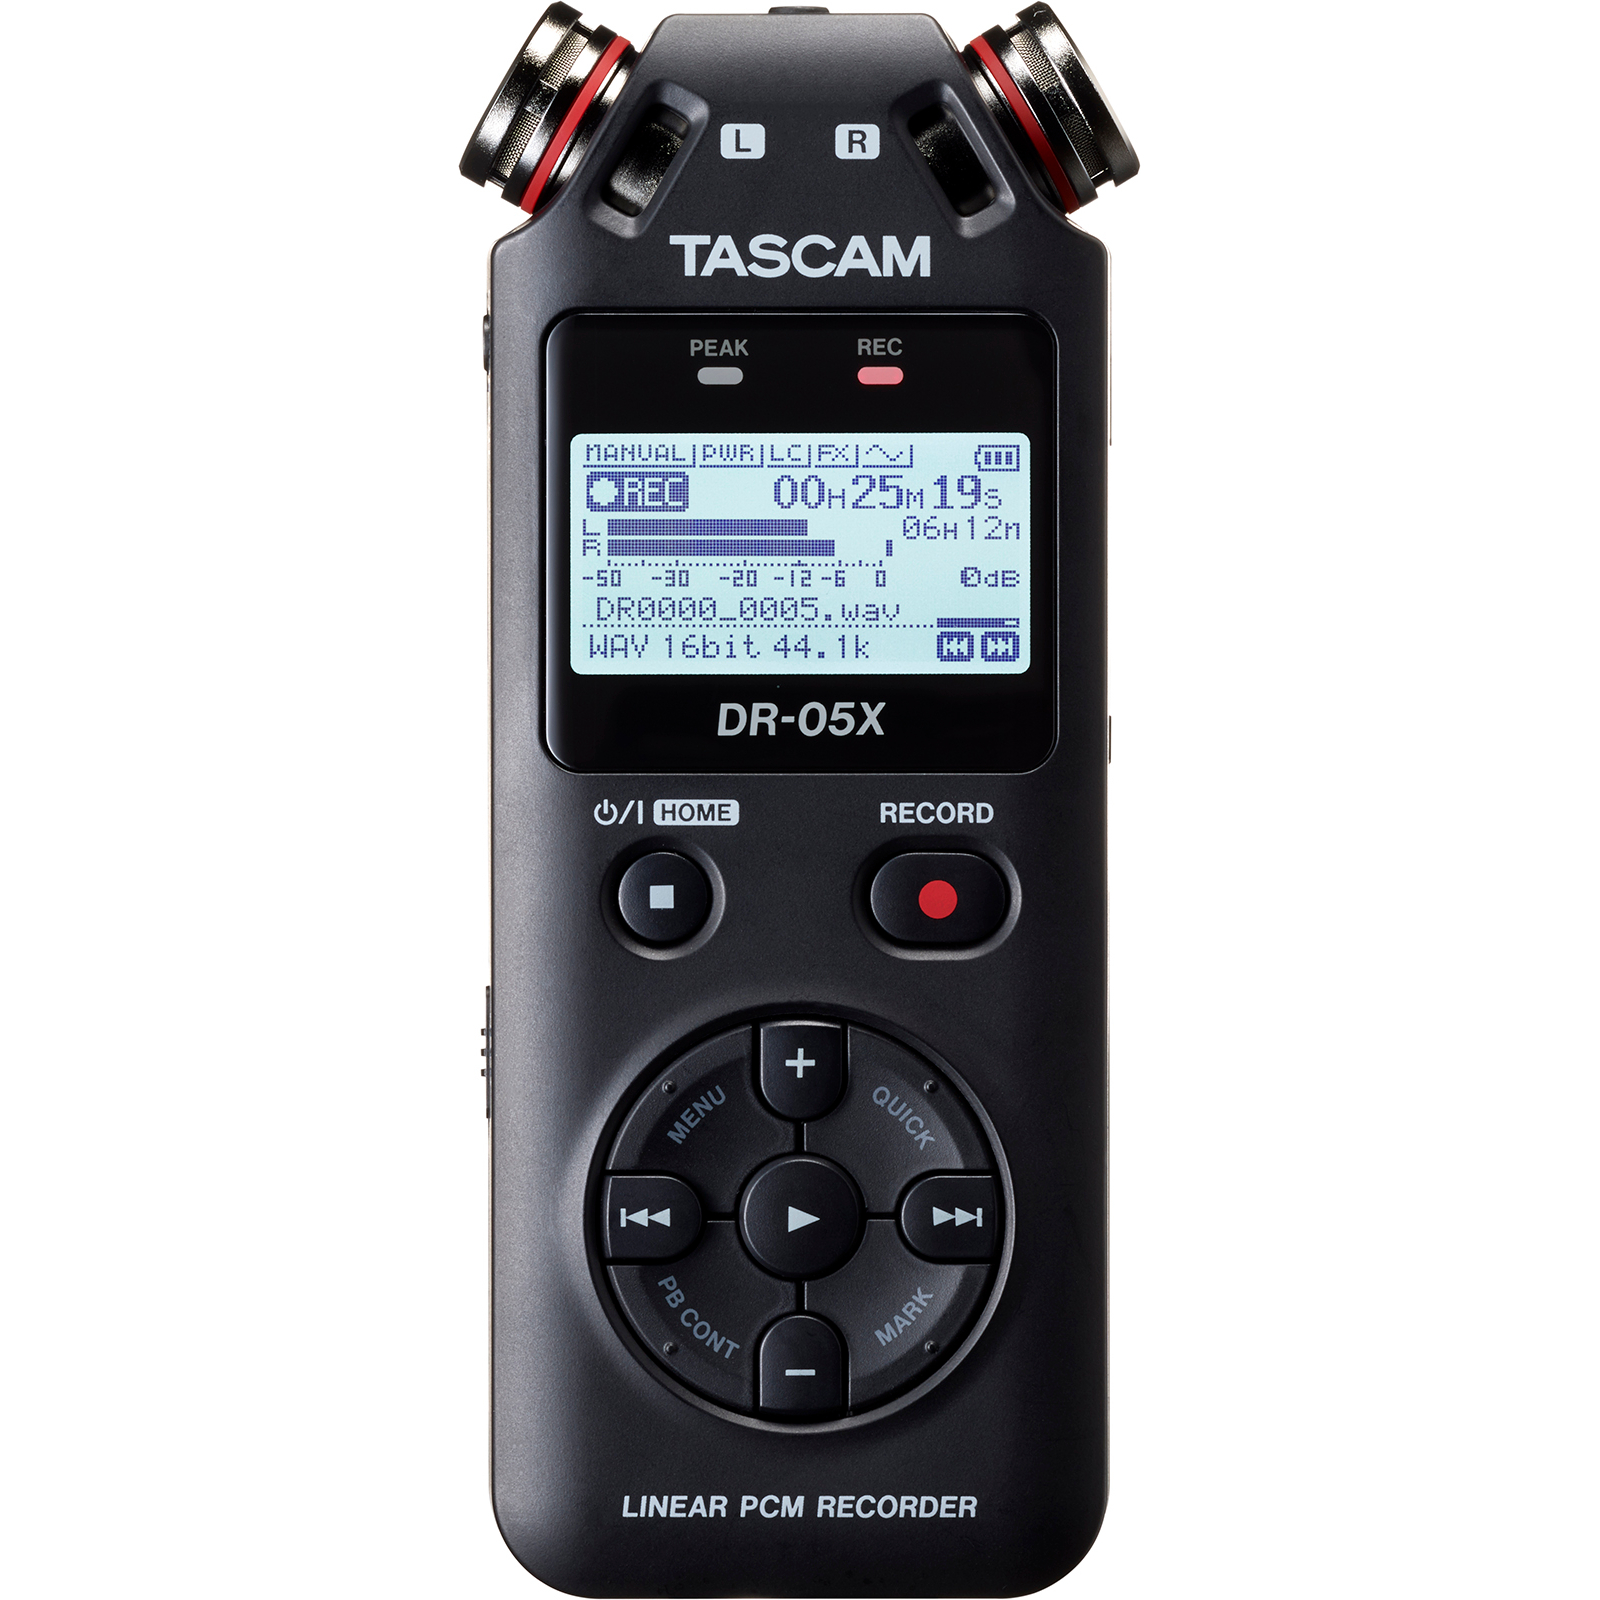 Is this a good recording device for a student with disability services